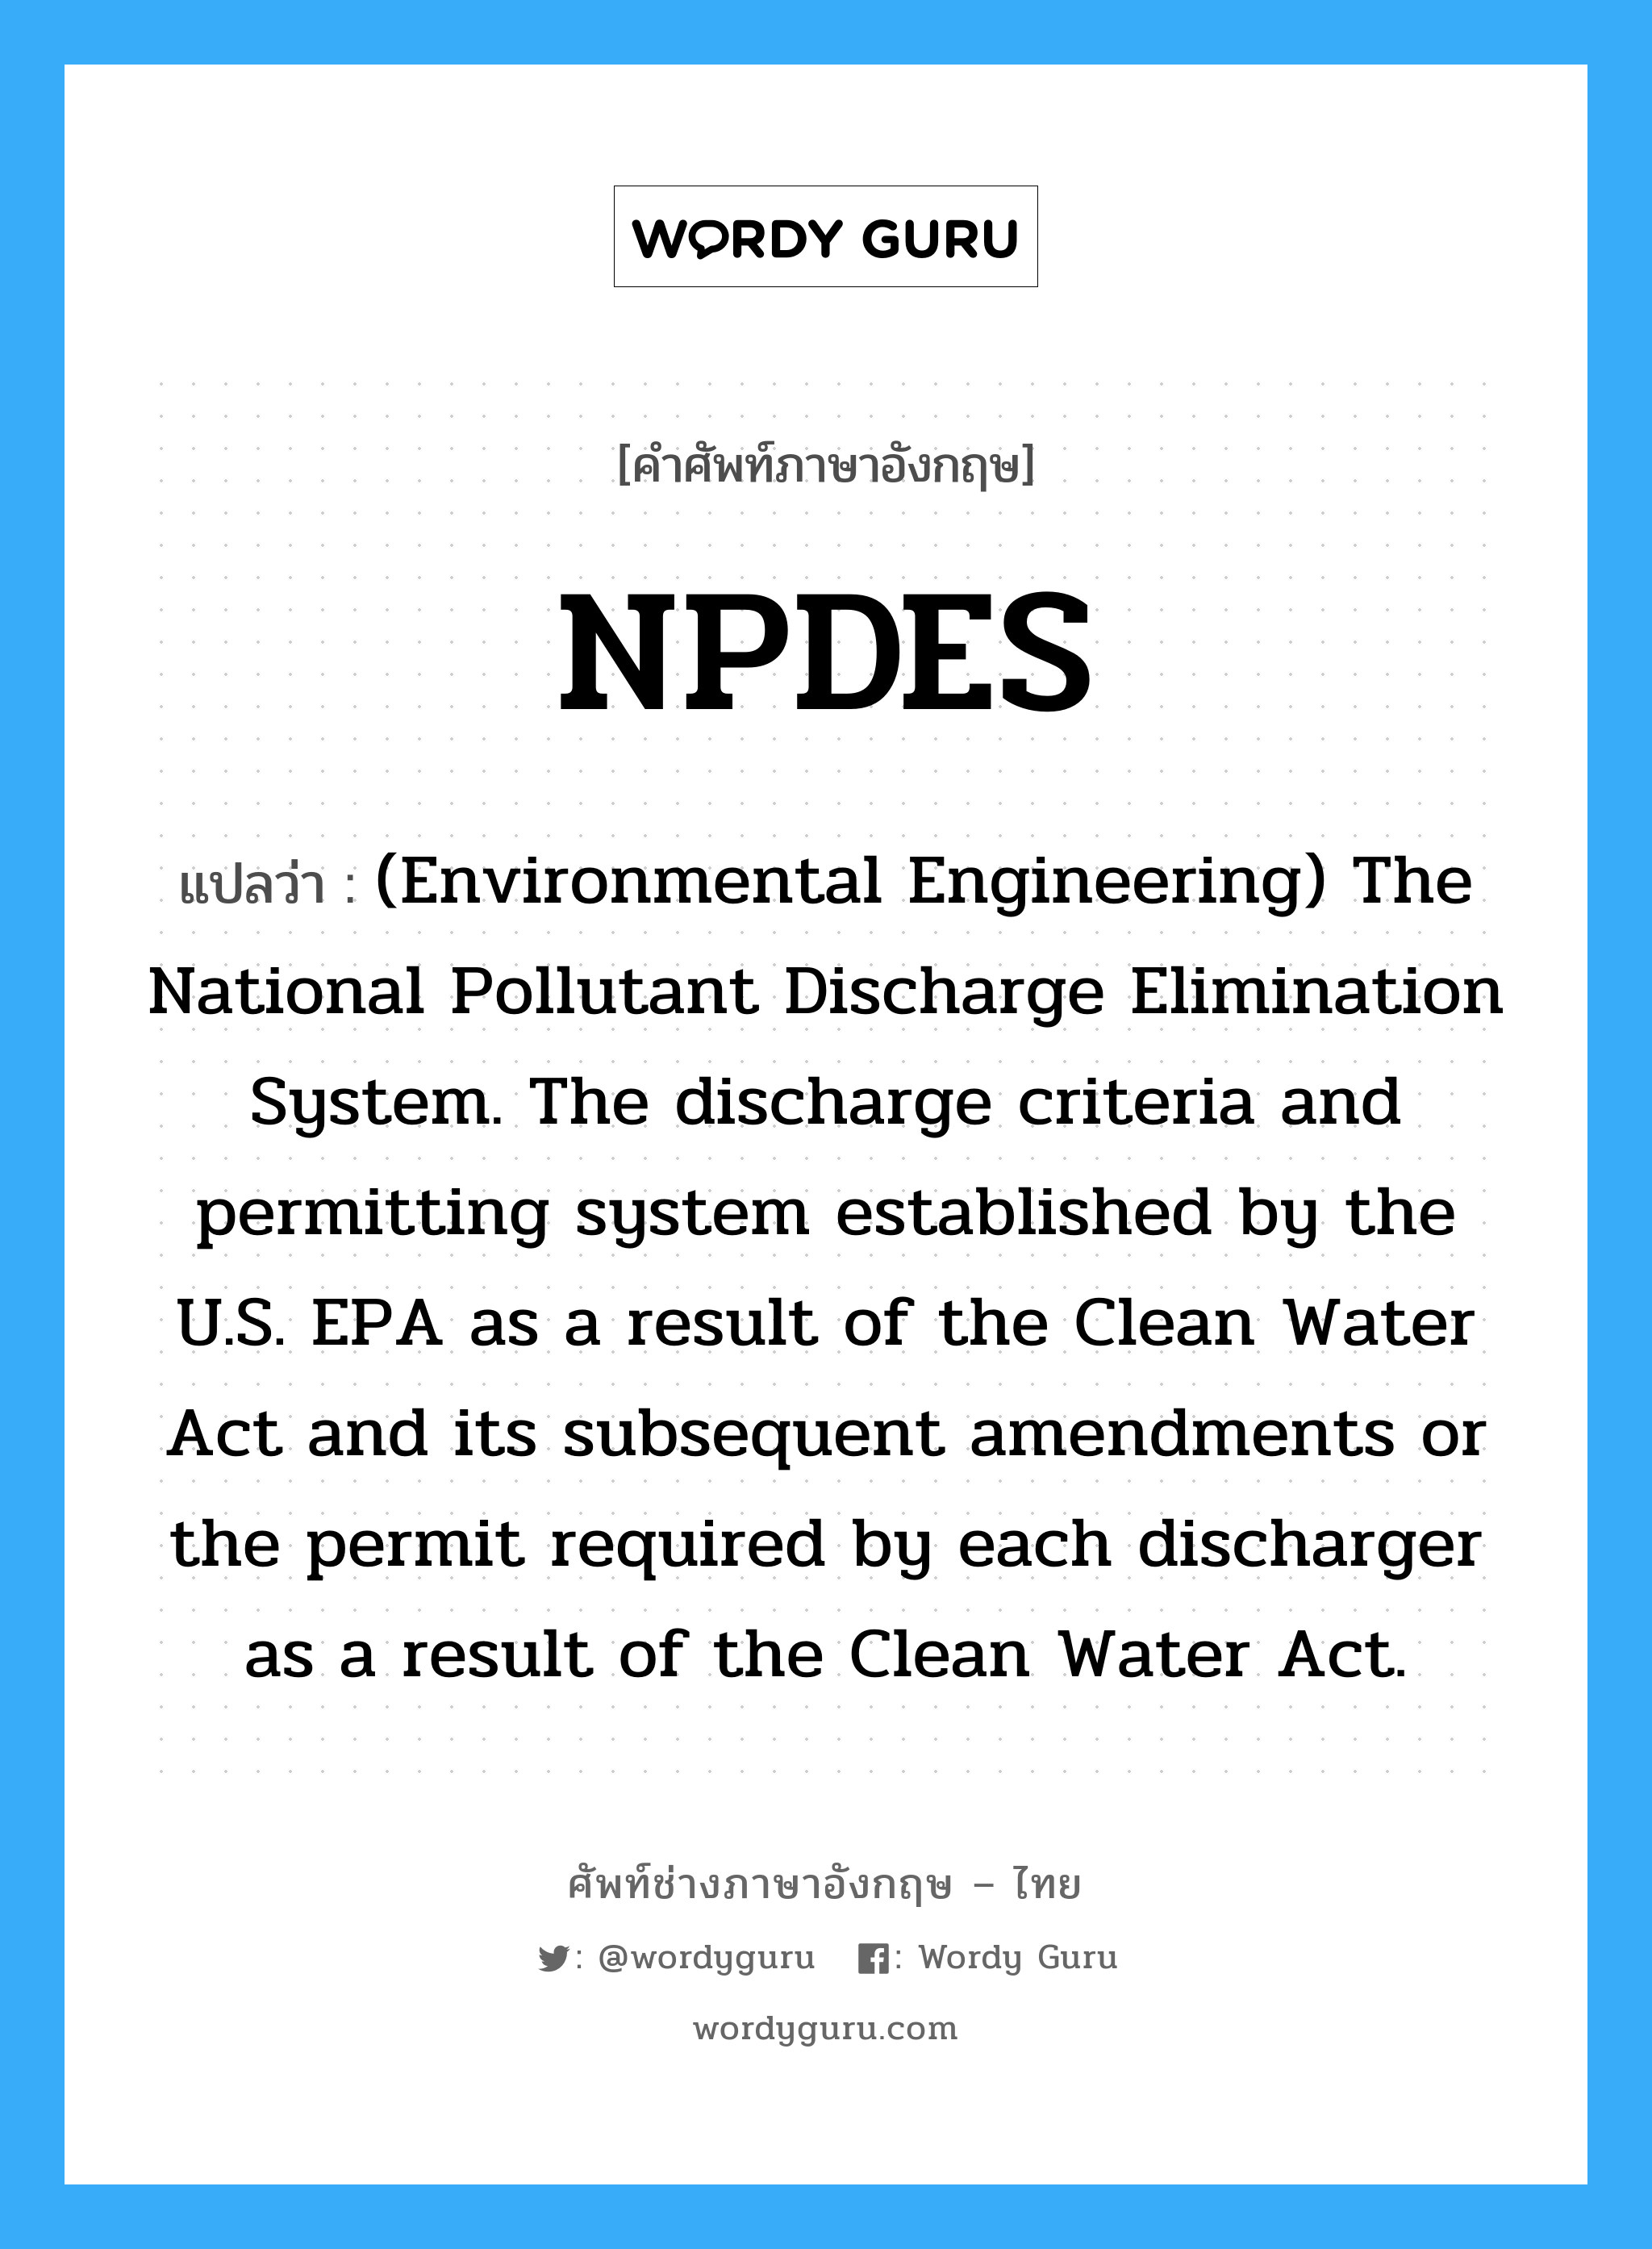 NPDES แปลว่า?, คำศัพท์ช่างภาษาอังกฤษ - ไทย NPDES คำศัพท์ภาษาอังกฤษ NPDES แปลว่า (Environmental Engineering) The National Pollutant Discharge Elimination System. The discharge criteria and permitting system established by the U.S. EPA as a result of the Clean Water Act and its subsequent amendments or the permit required by each discharger as a result of the Clean Water Act.